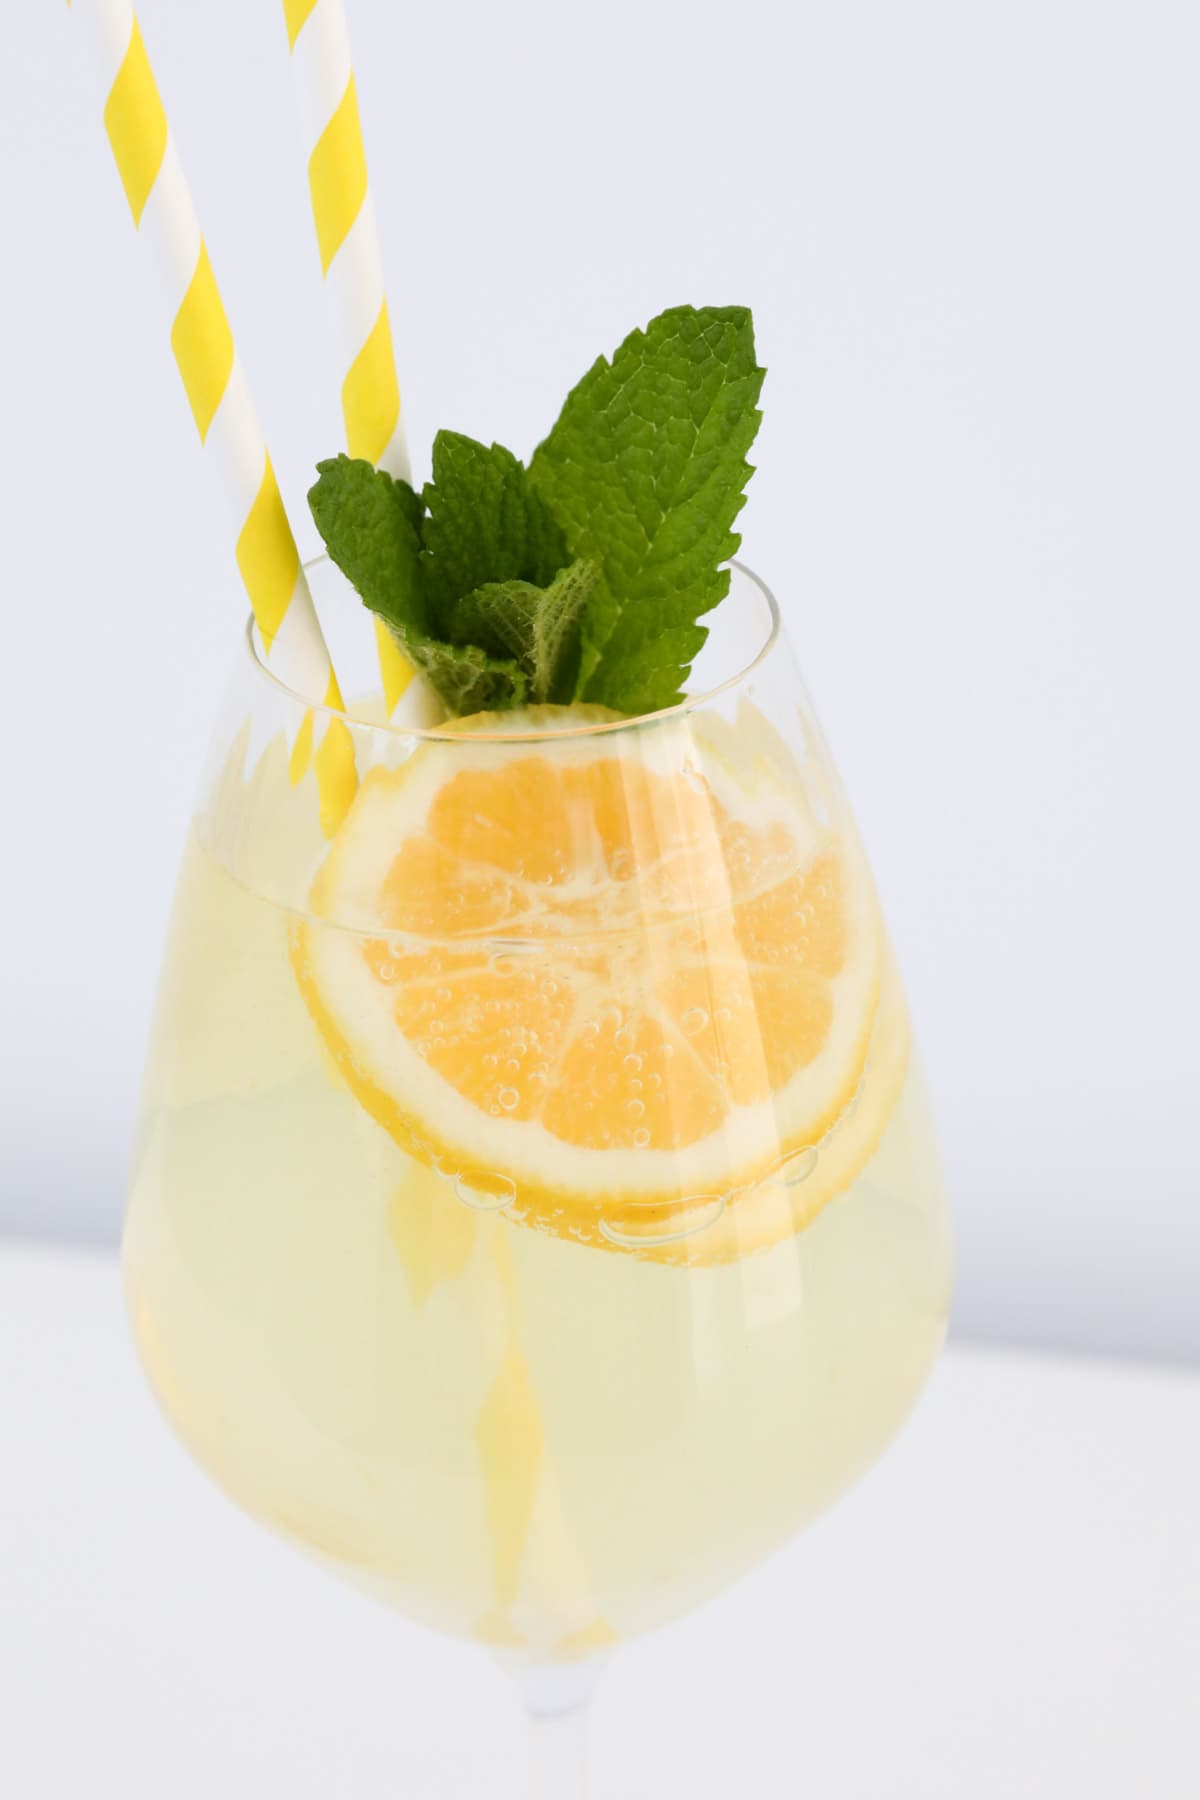 Limoncello prosecco cocktail in glass garnished with lemon slices and fresh mint.